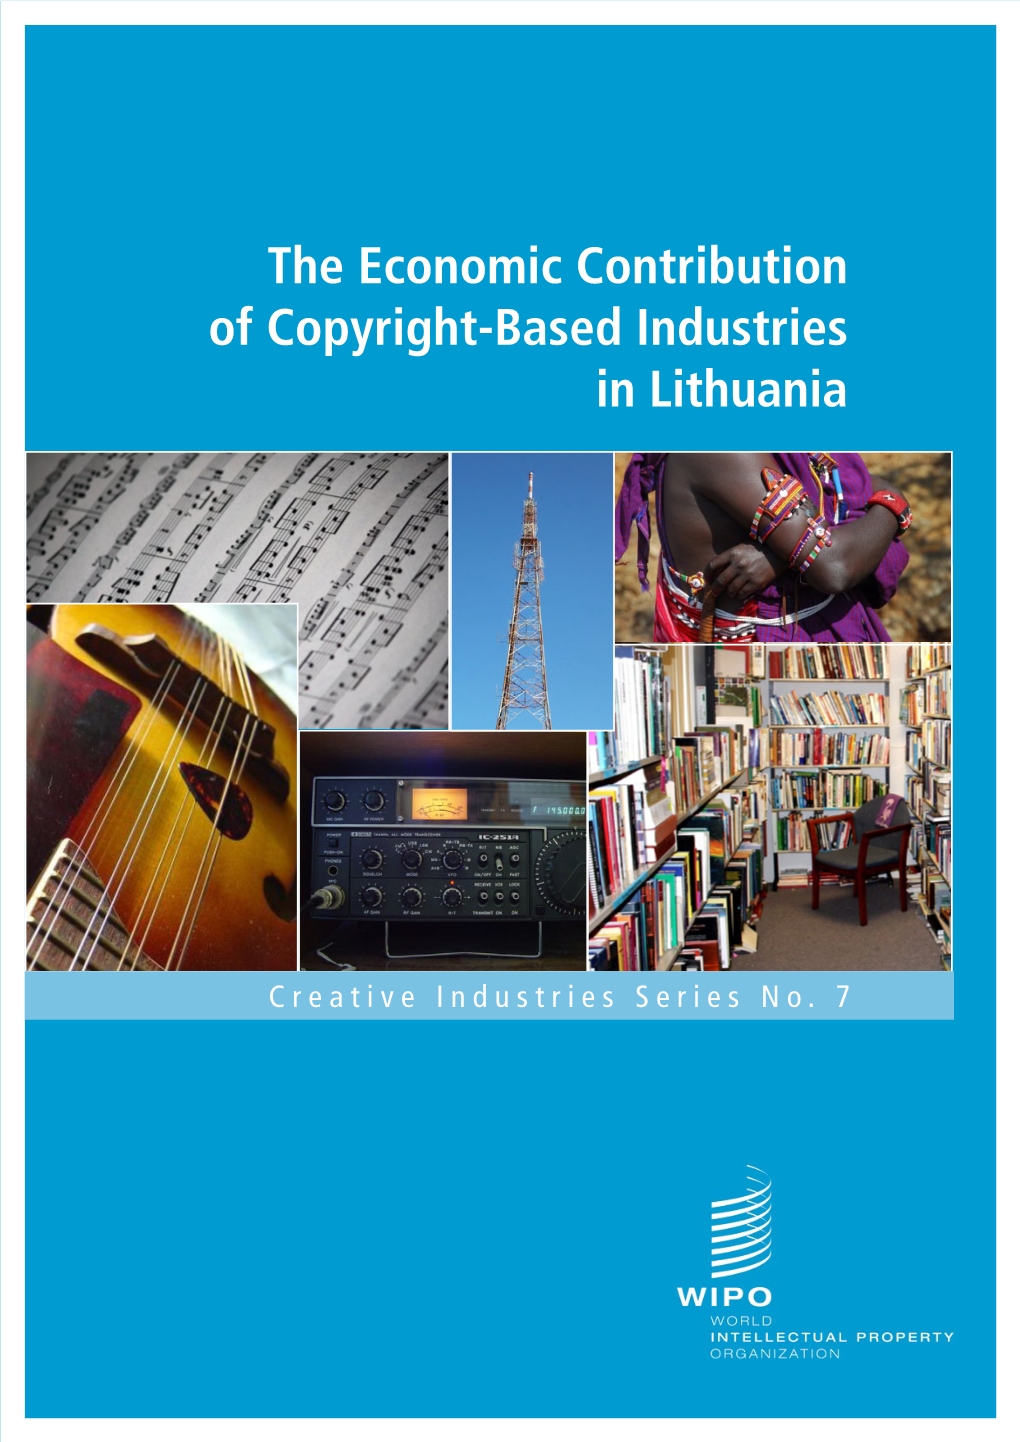 The Economic Contribution of Copyright-Based Industries in Lithuania